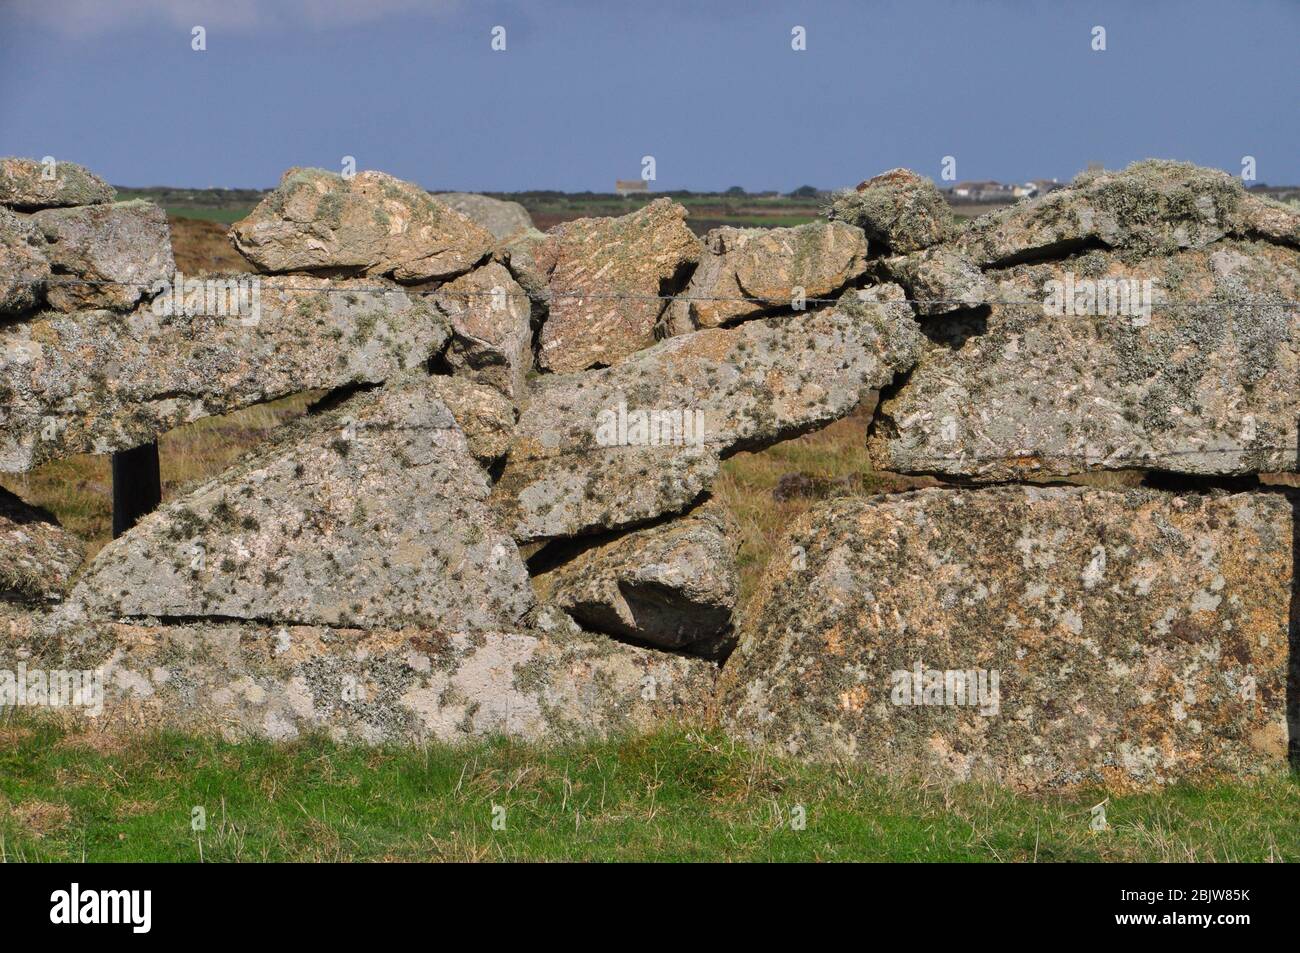 Large Granite boulders create a long lasting dry stone wall.The wall is Lichen and moss covered large stones with holes.Cornwall;UK;England Stock Photo